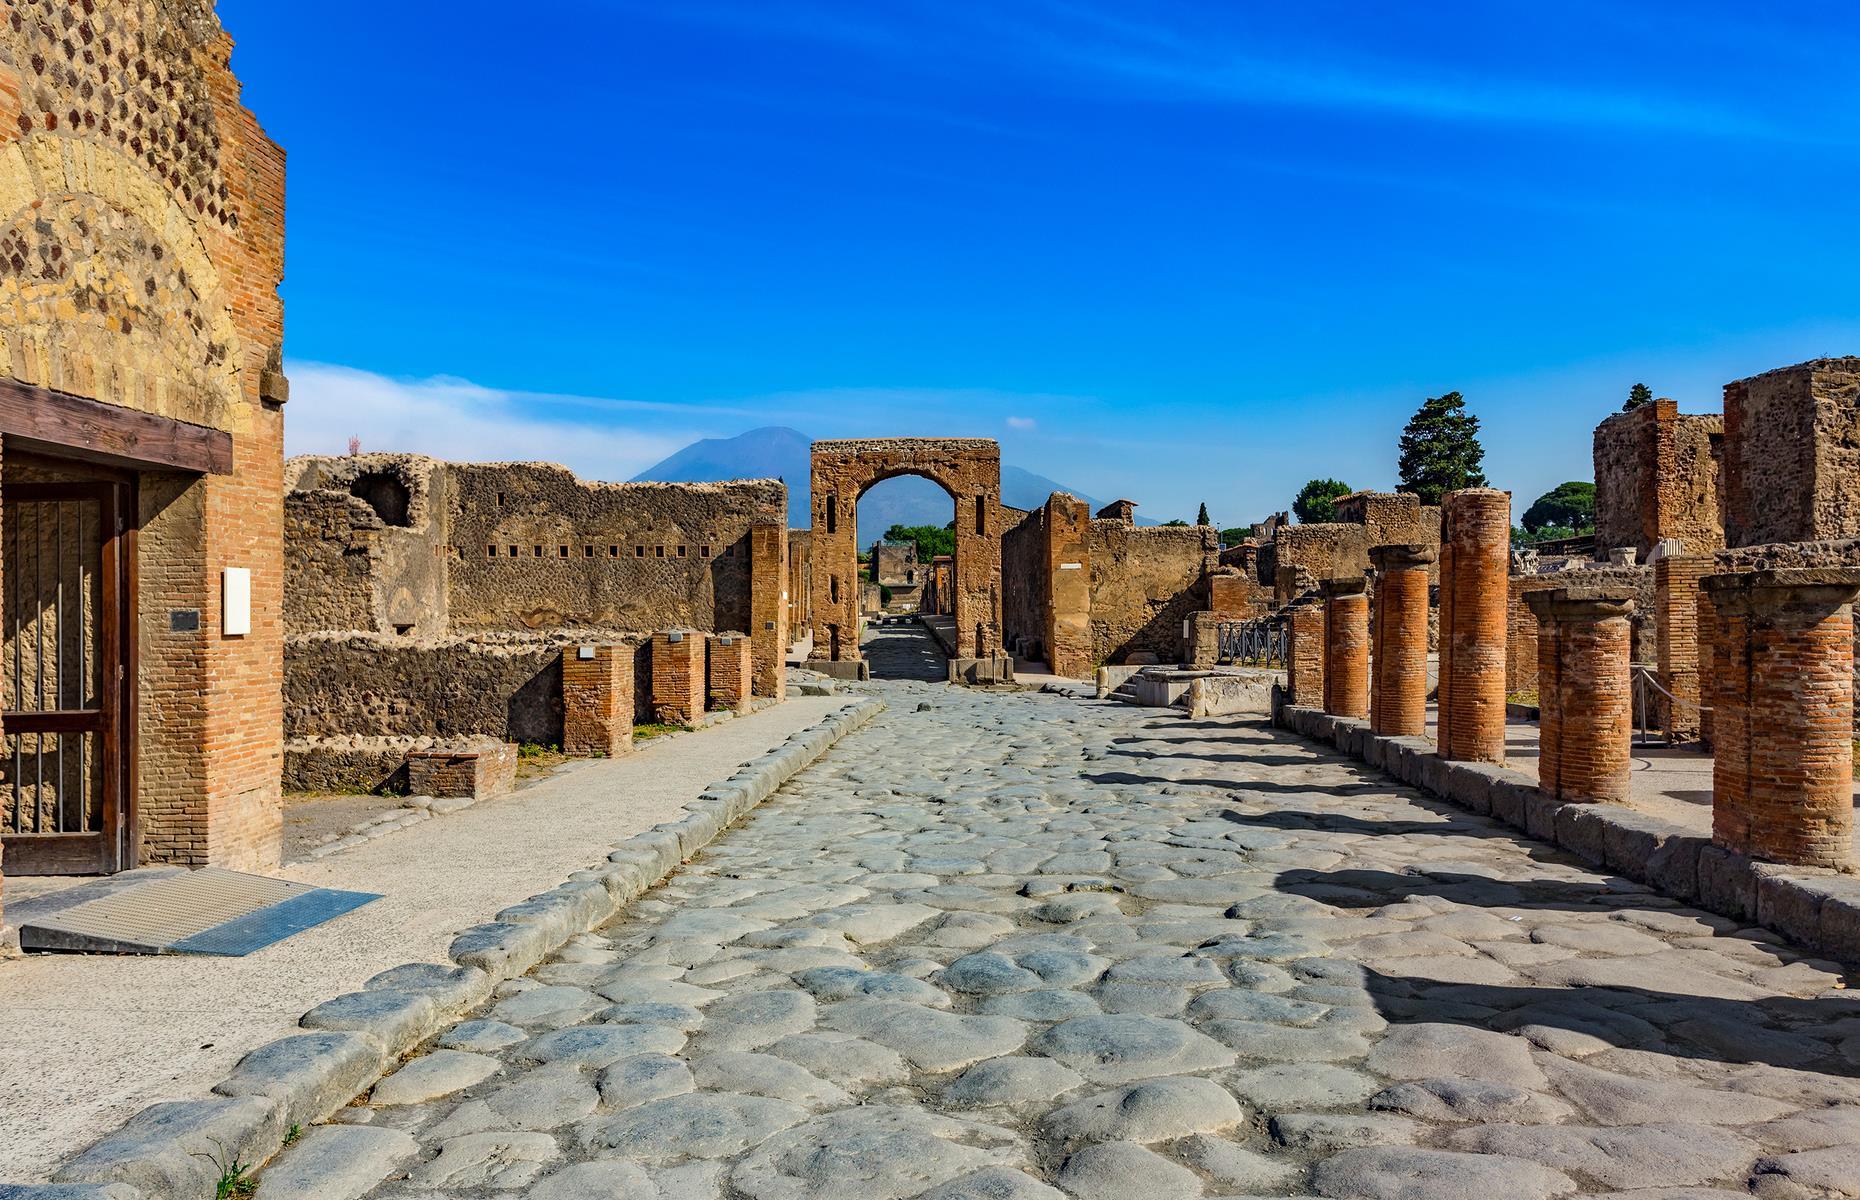 <p>The once prosperous Roman city of Pompeii at the southeastern base of Mount Vesuvius was devastated by an eruption in AD 79 that rained down ash and volcanic rock. When the city was rediscovered nearly 2,000 years later, everything, from buildings and even food and jewelry, had been perfectly preserved. Check out <a href="https://www.loveexploring.com/galleries/82255/pompeiis-secrets-that-are-only-just-being-uncovered?page=1">Pompeii's secrets that are only just being uncovered</a>.</p>